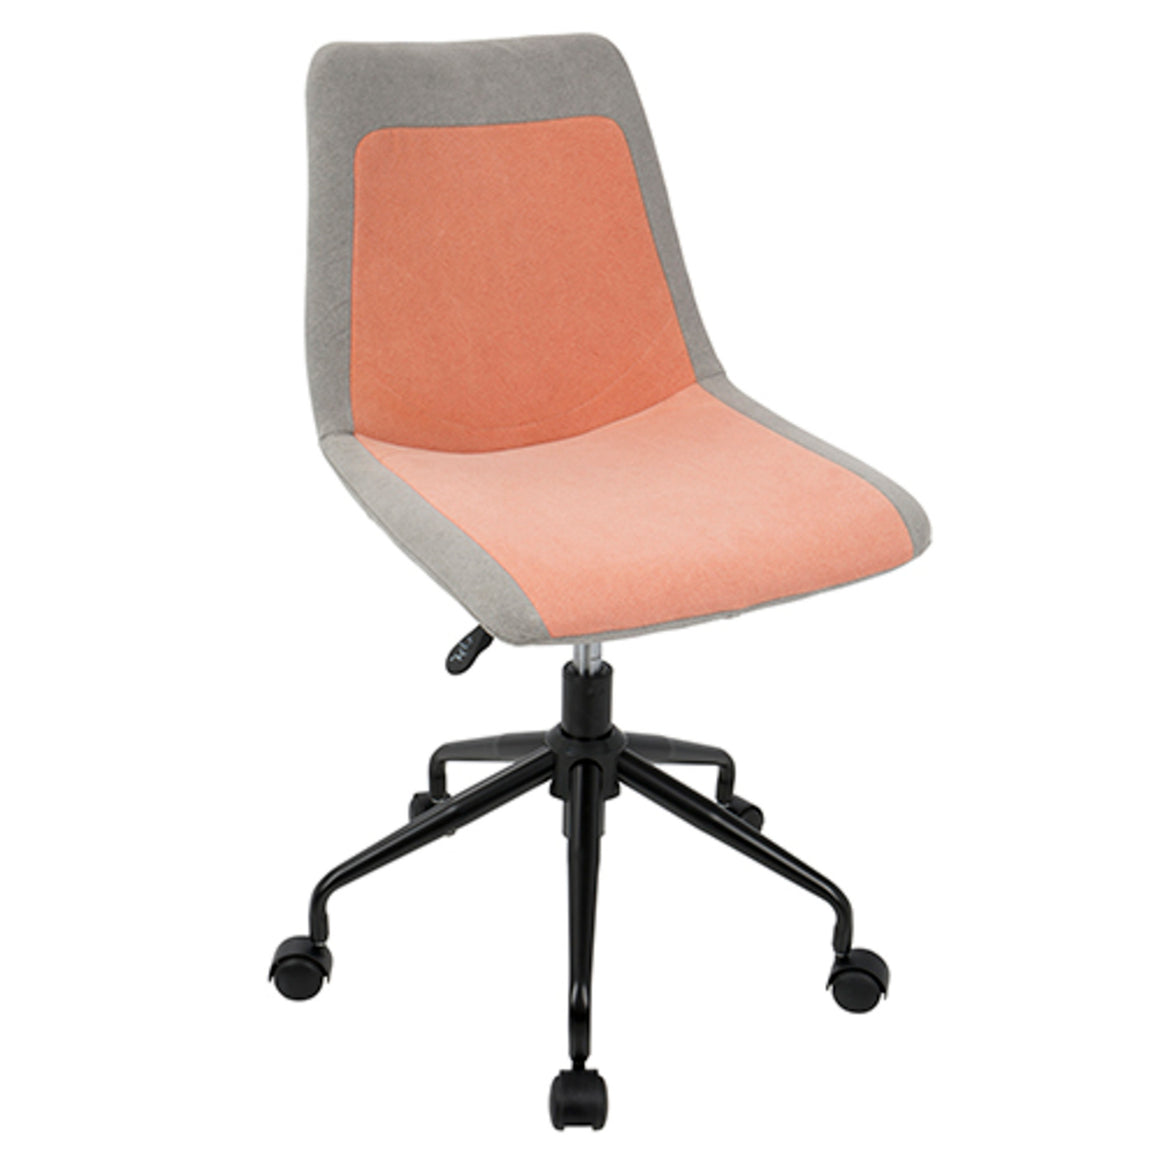 Orzo Height Adjustable Task Chair in Black with Orange Denim Fabric by LumiSource